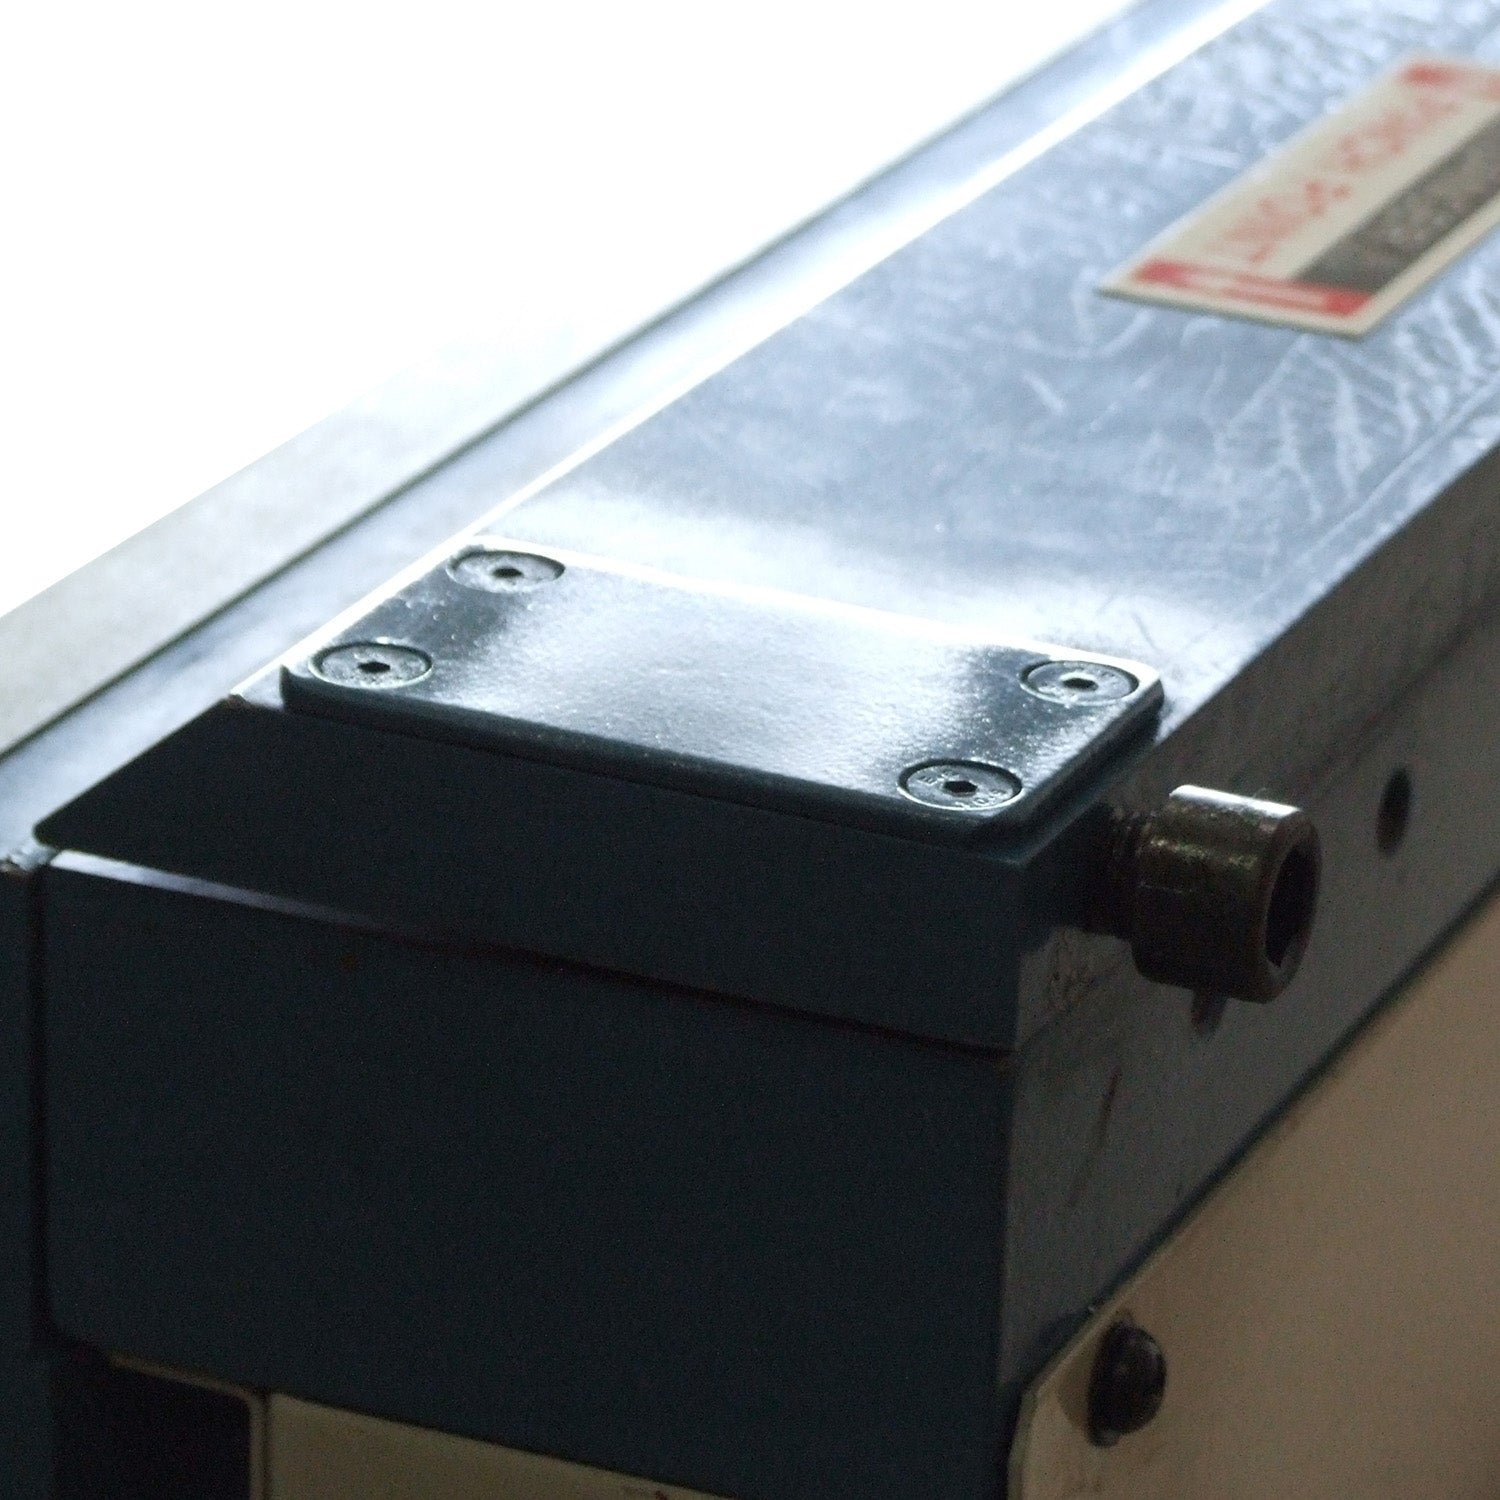 Baileigh BB-7216M 220V(+/- 5 percent) 1 Phase Manually Operated Magnetic Sheet Metal Brake, 6' Length